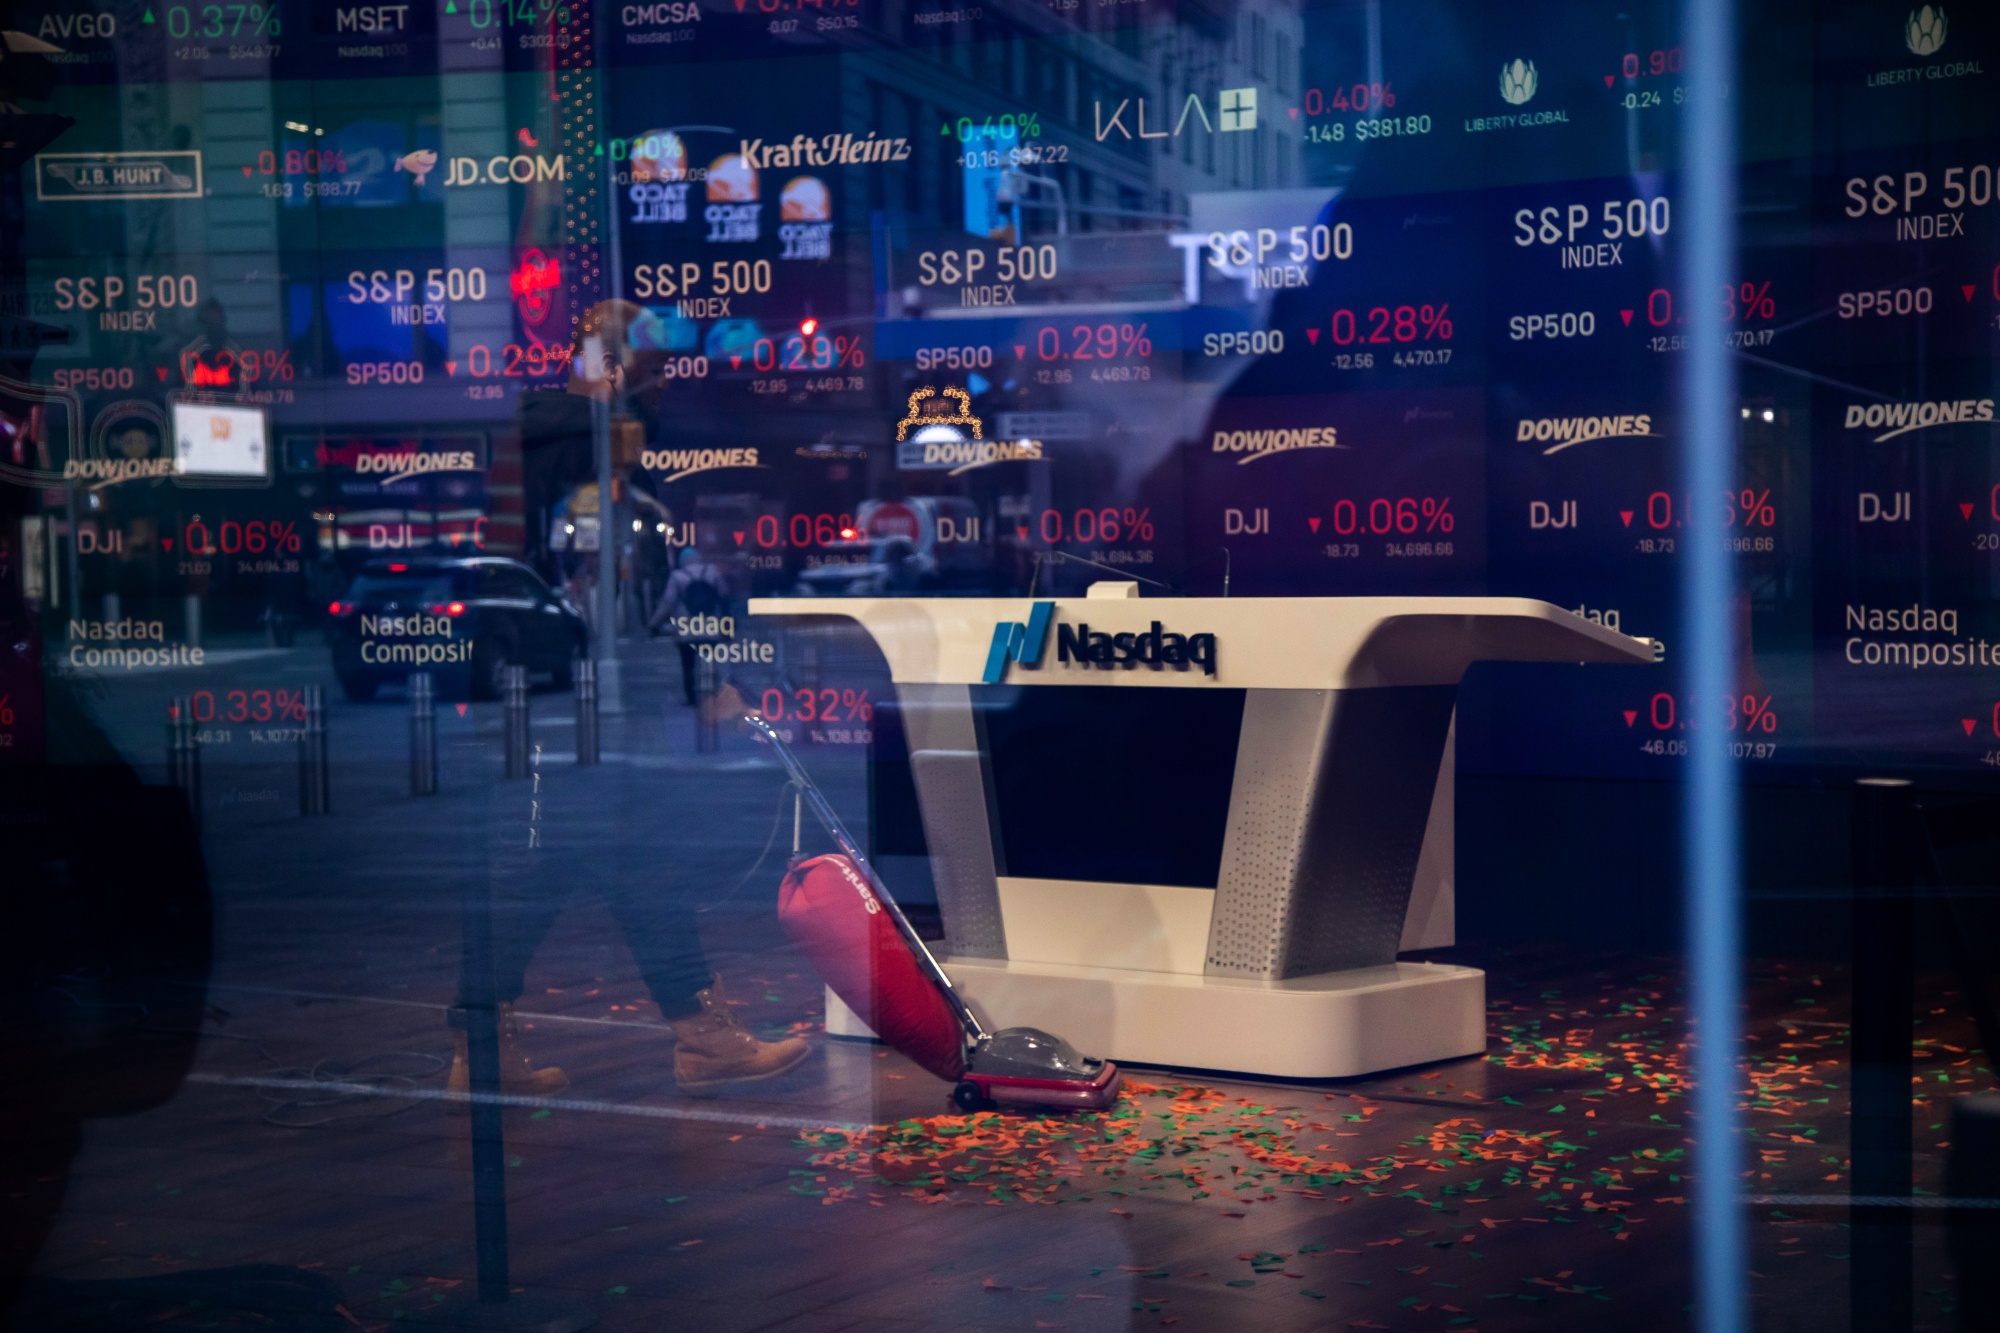 A worker vacuums up confetti after the opening bell at the Nasdaq MarketSite in New York.